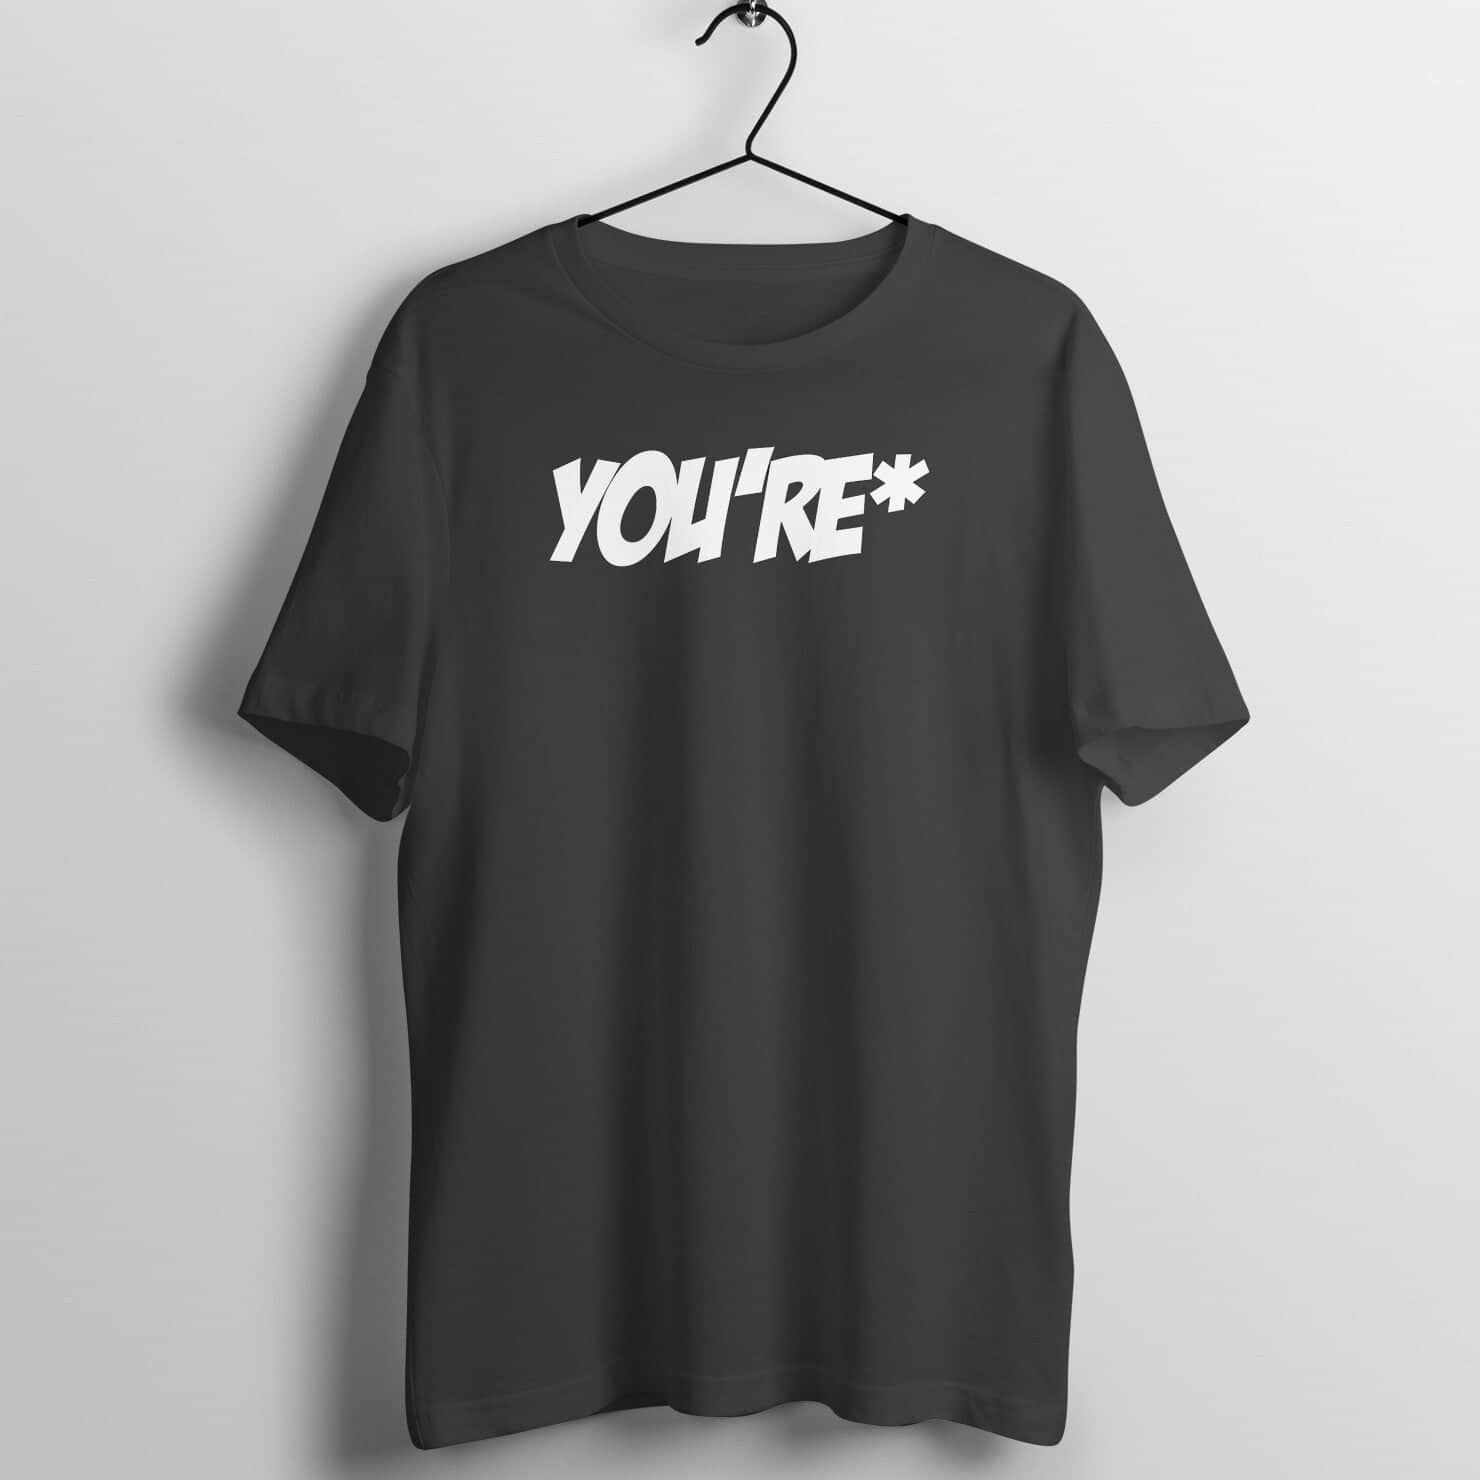 You'Re Funny Correct Grammar T Shirt for Women and Men freeshipping - Catch My Drift India